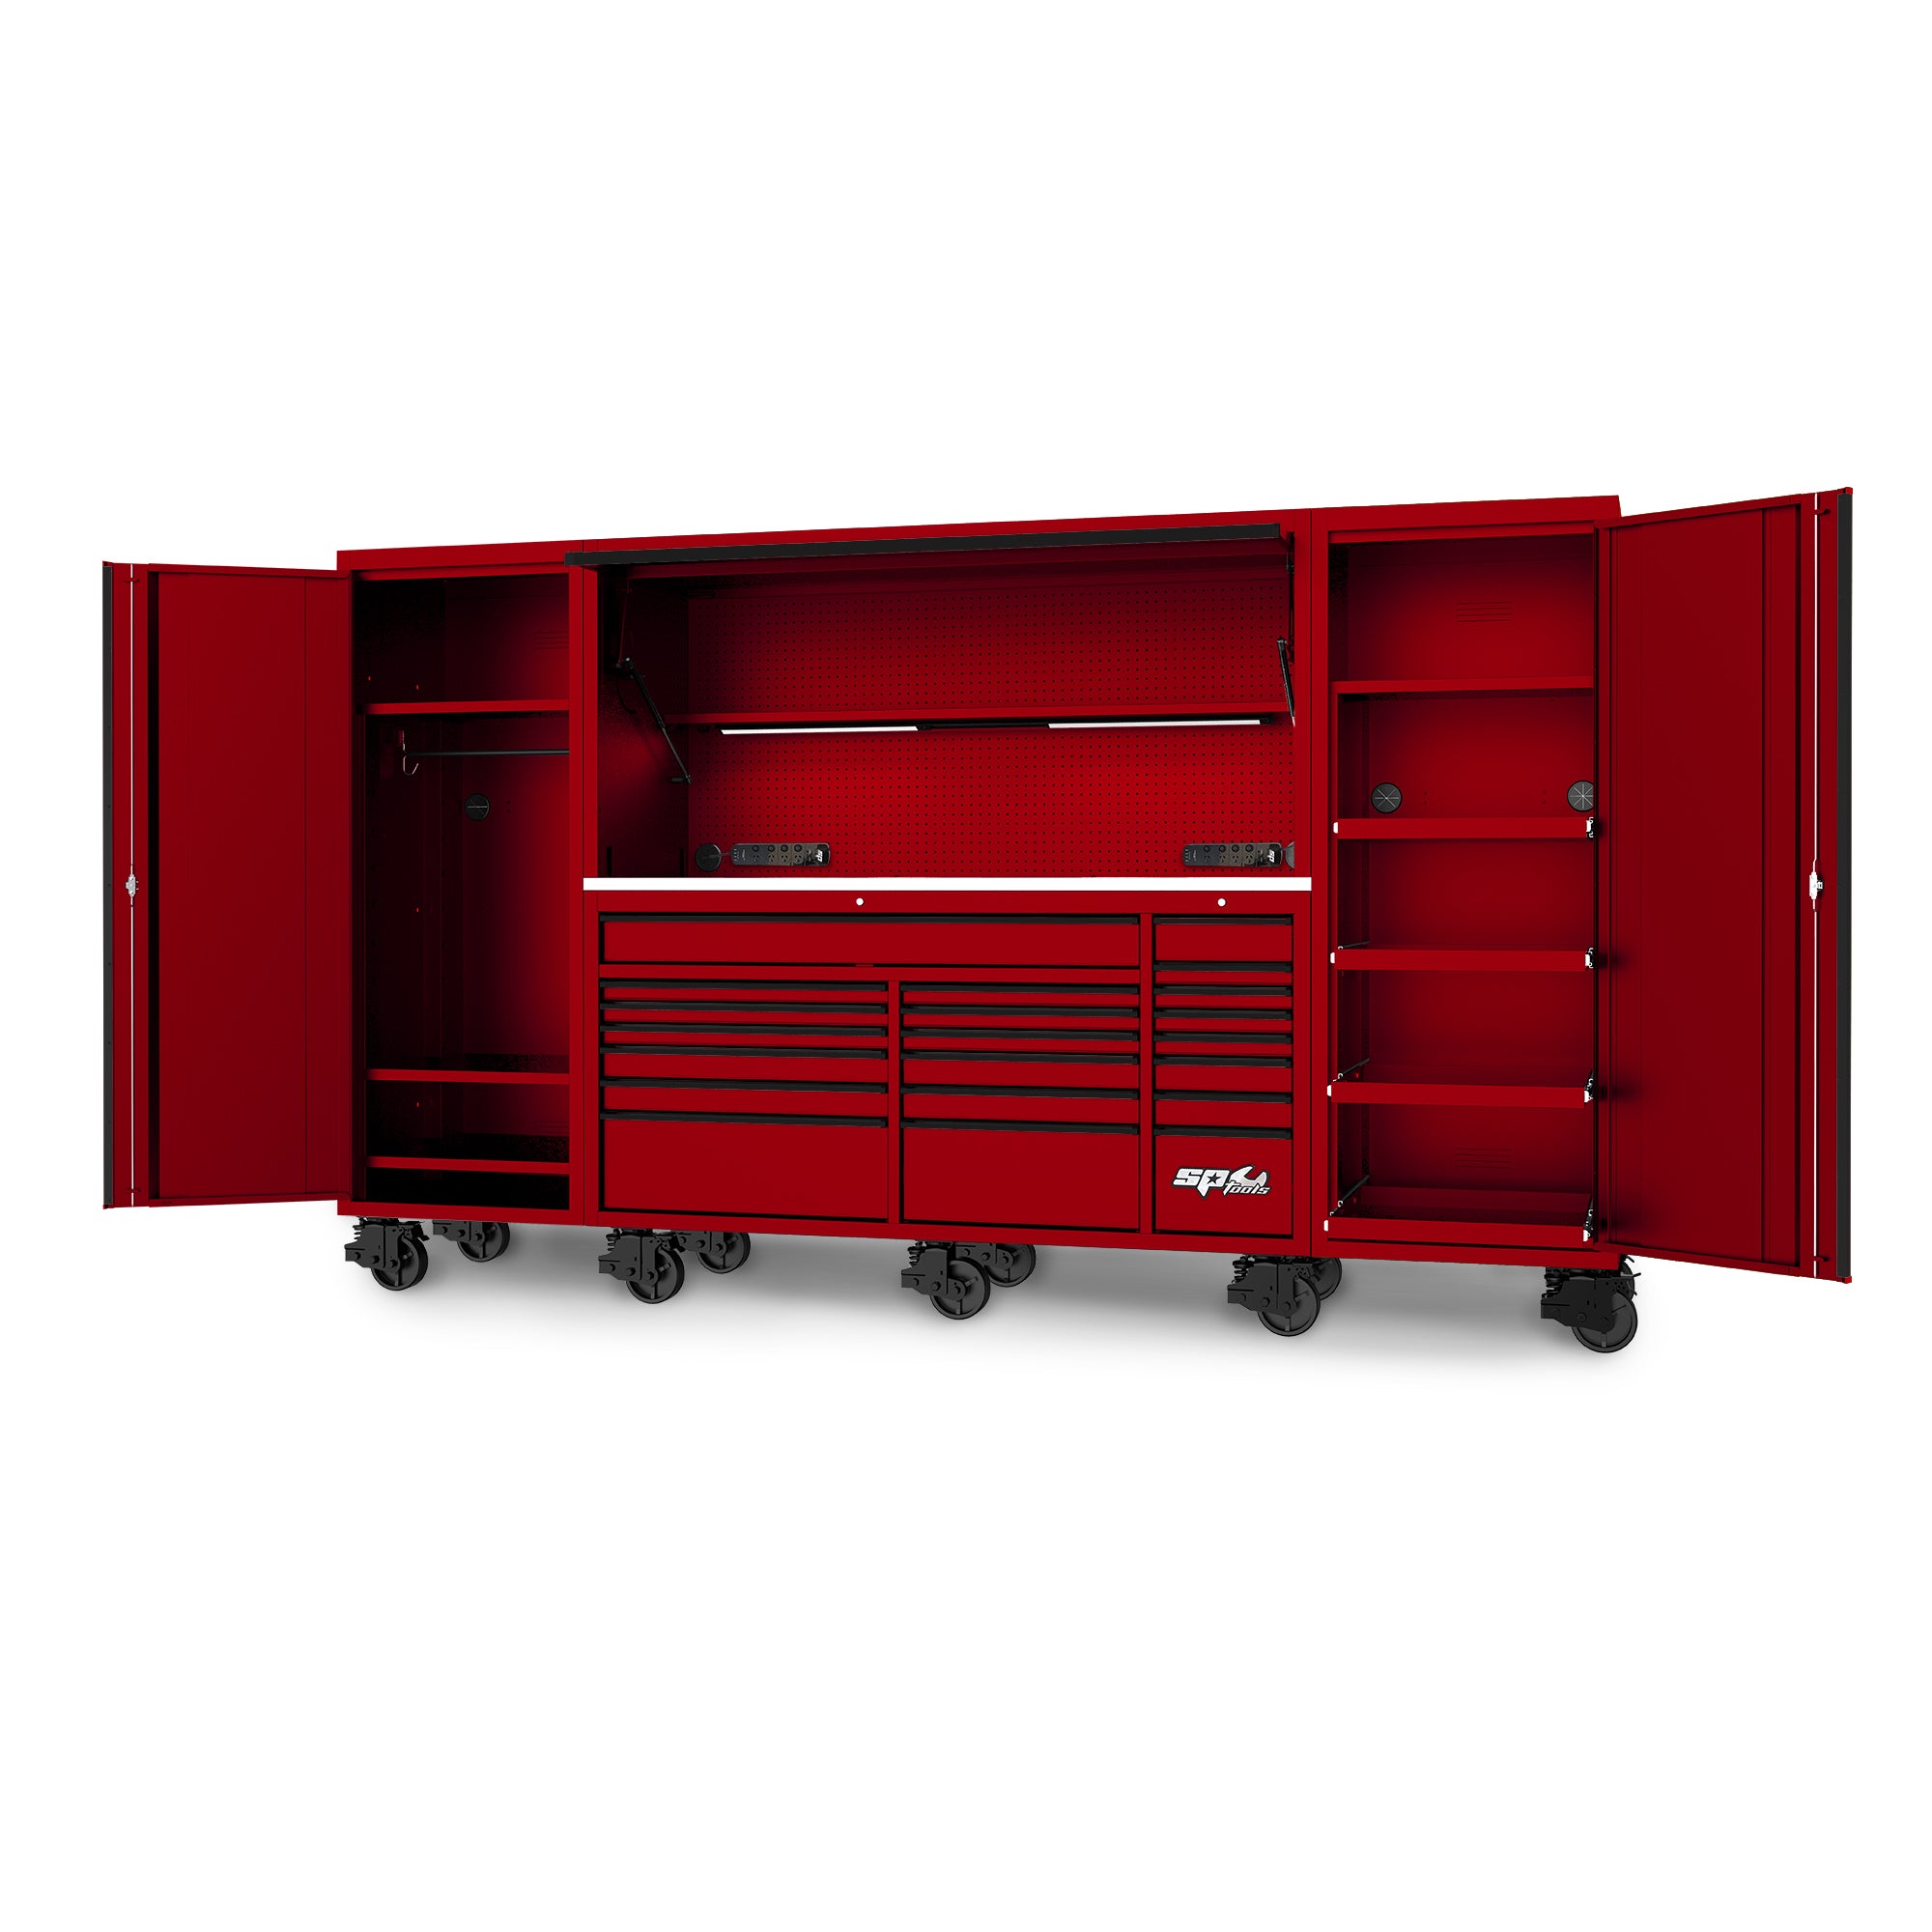 128" USA SUMO SERIES COMPLETE WORKSTATION - RED/CHROME